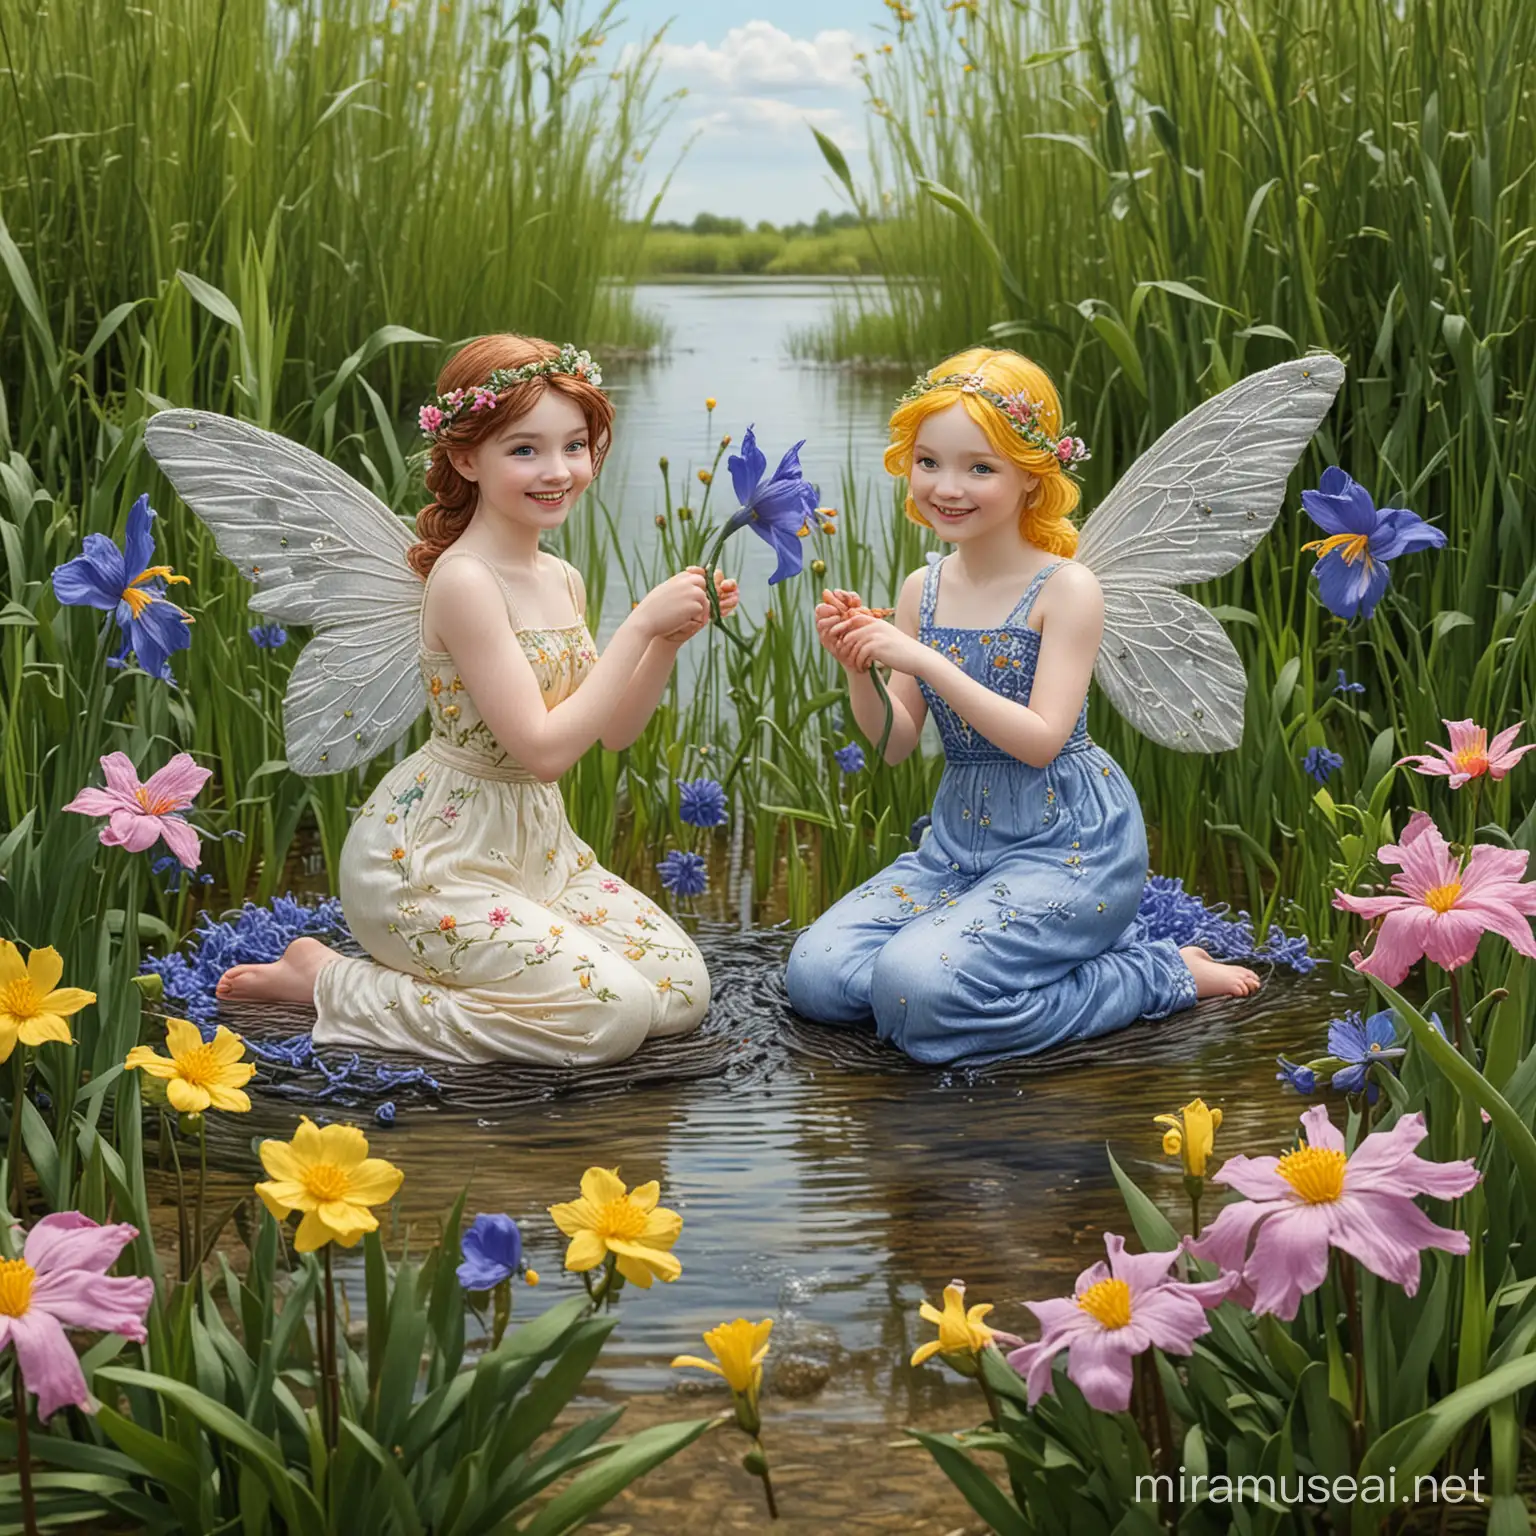 embroidery, two beautiful fairy girls laughing and enjoying the spring daylight in a marsh, behind the scene a big scooped willow tree, marsh marigold, water hyacinth, blue flag iris, swamp azalea, rose mallow, pickerelweed